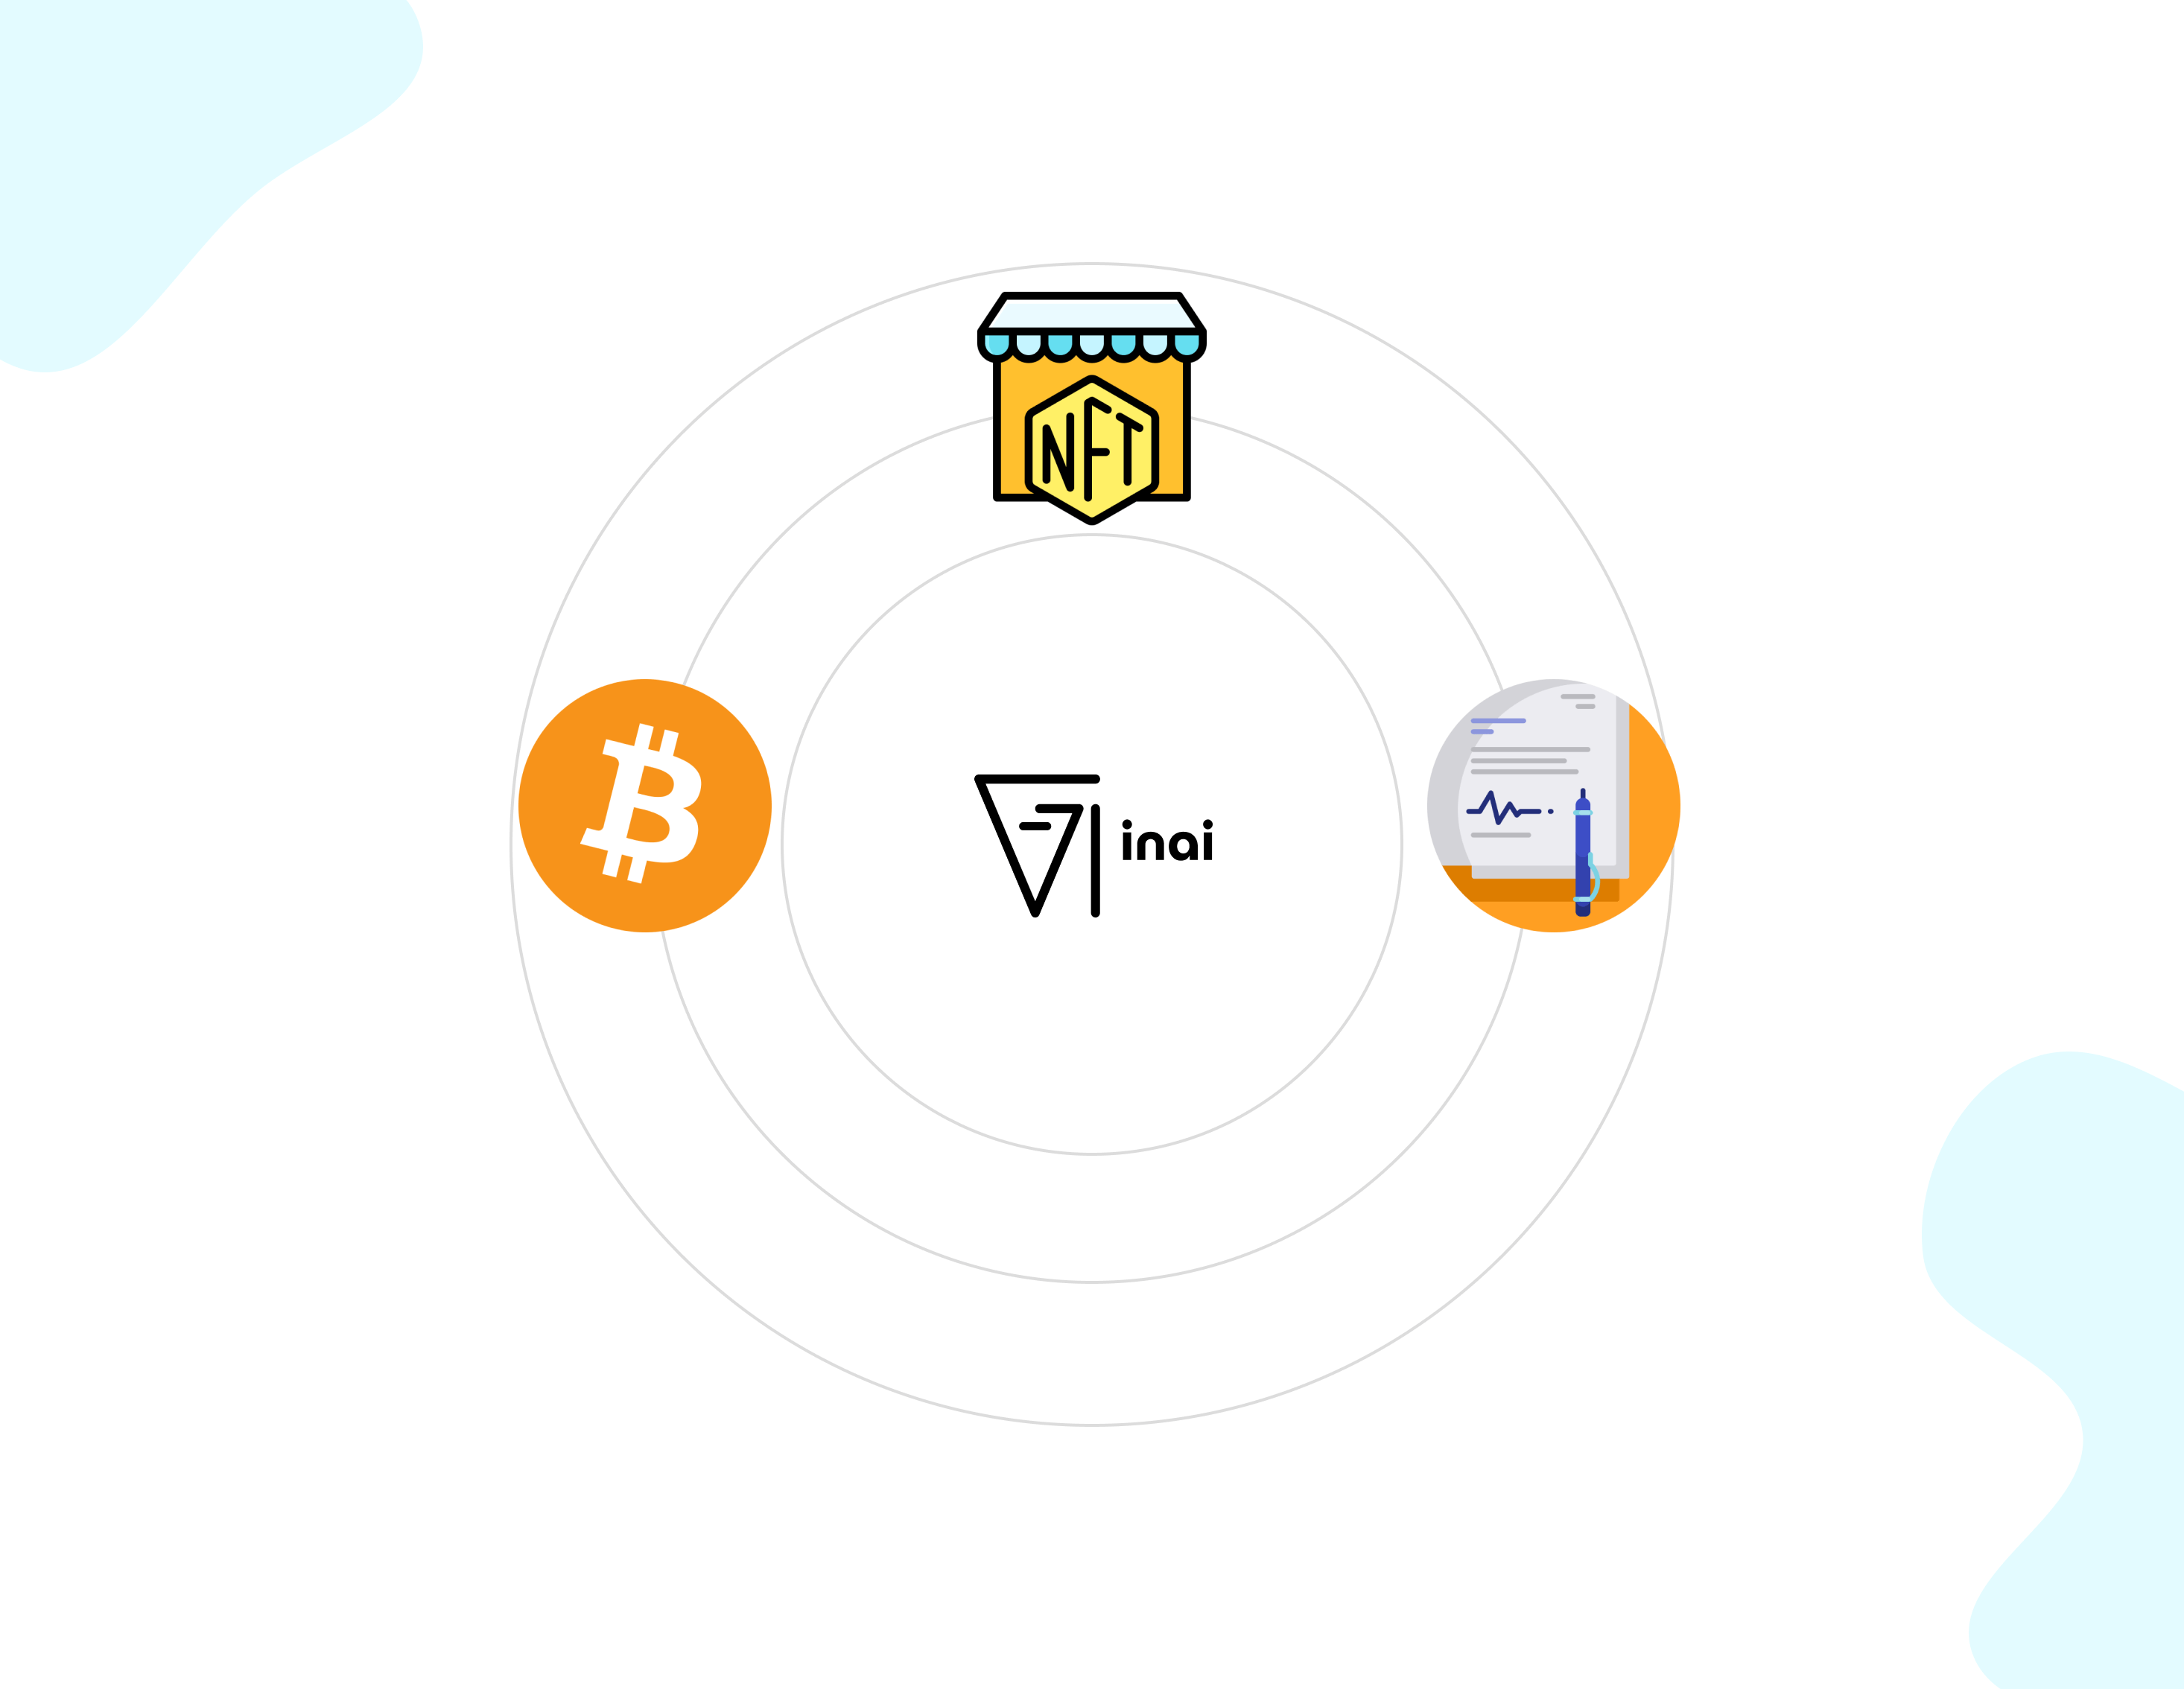 What are Cryptos, NFTs, DeFi Protocols, and Smart Contracts